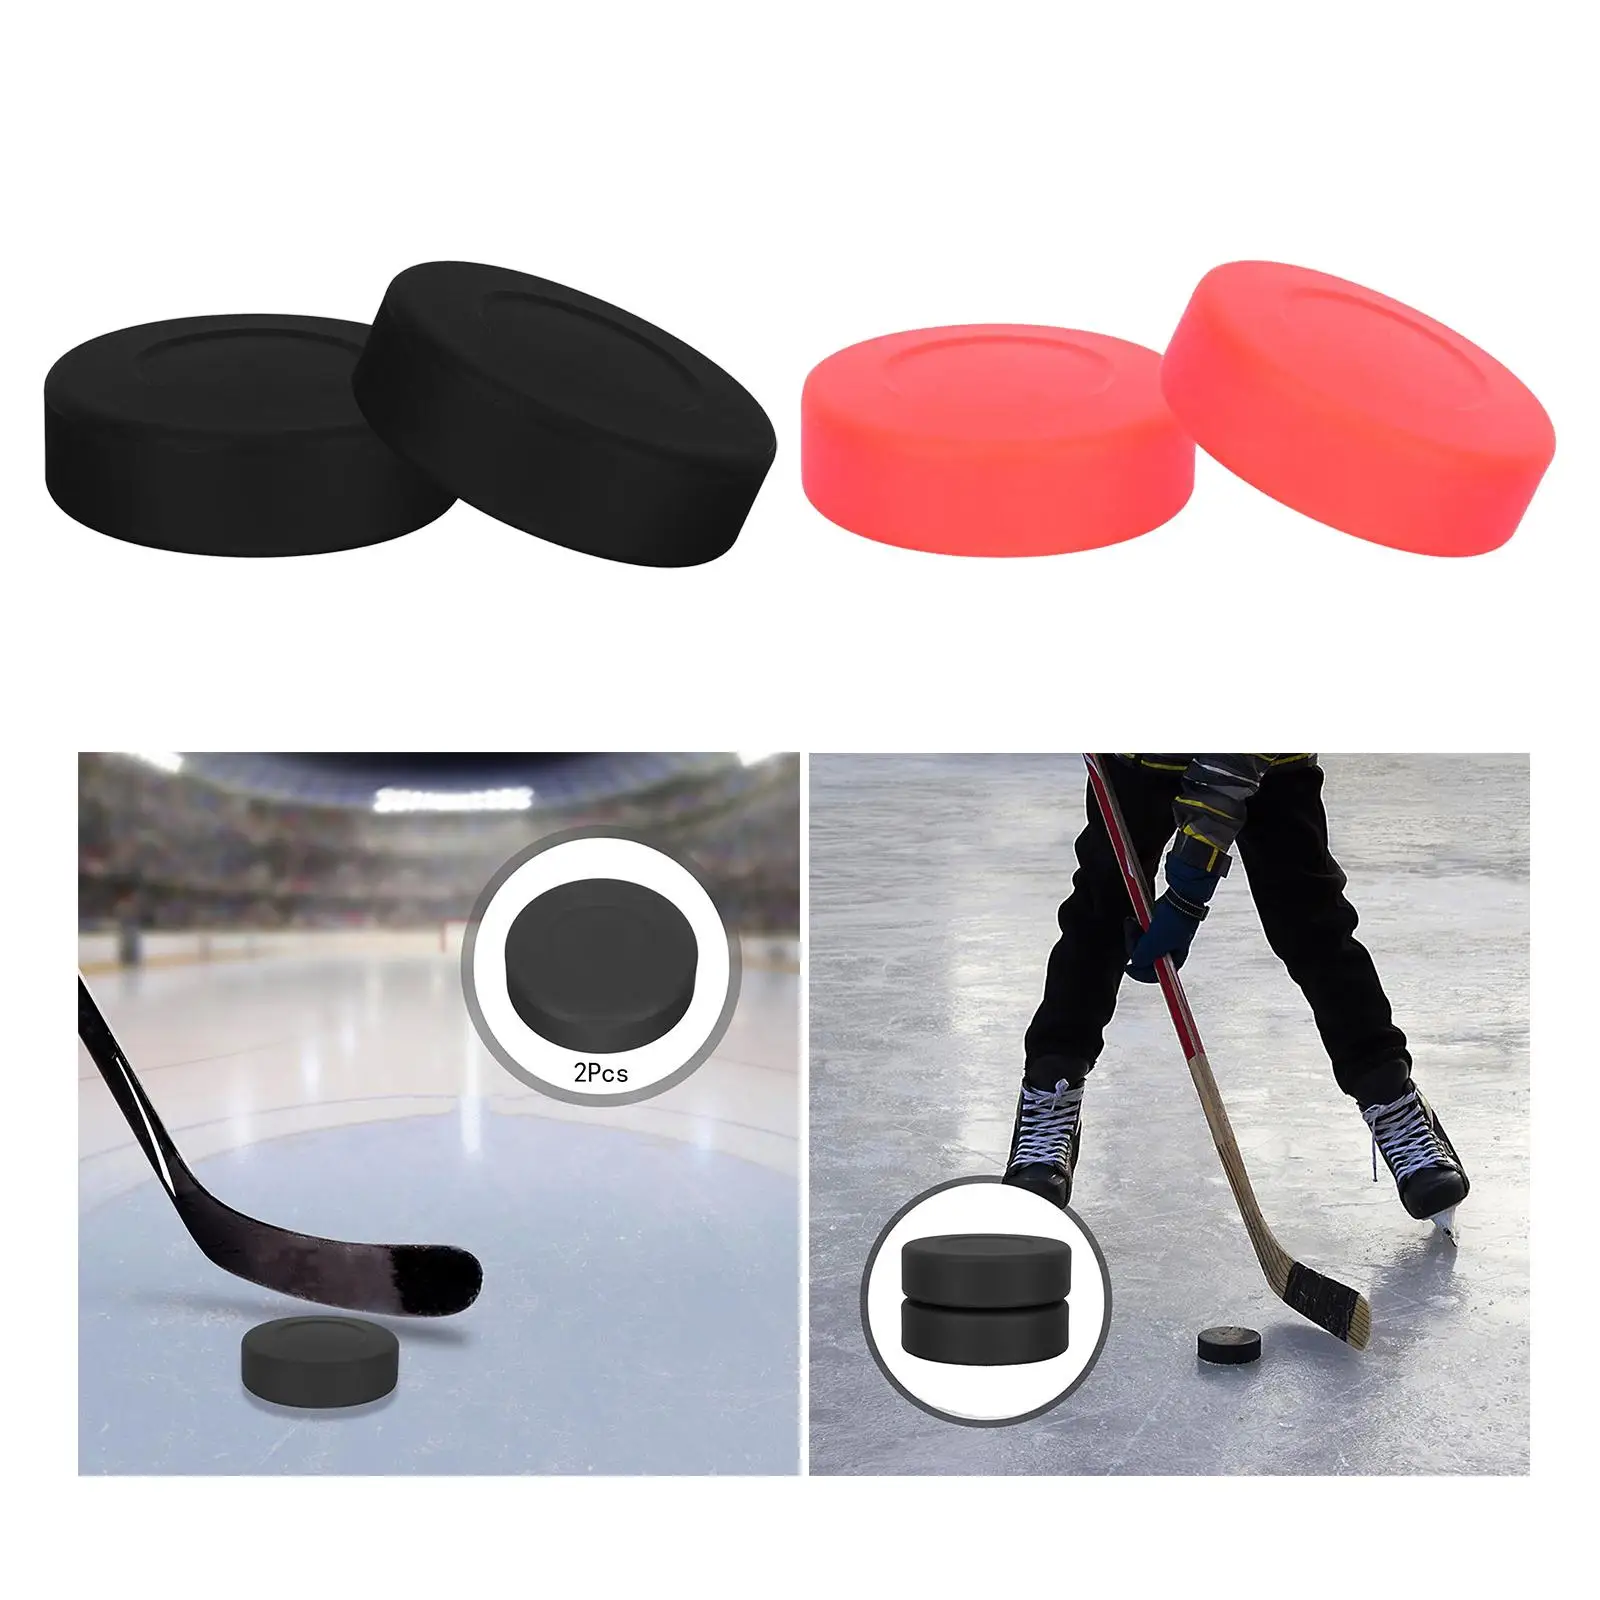 2 Pieces Ice Hockey Puck Sturdy Portable Rubber Hockey Puck Hockey Ball for Professionals Children Beginners Athletes Training